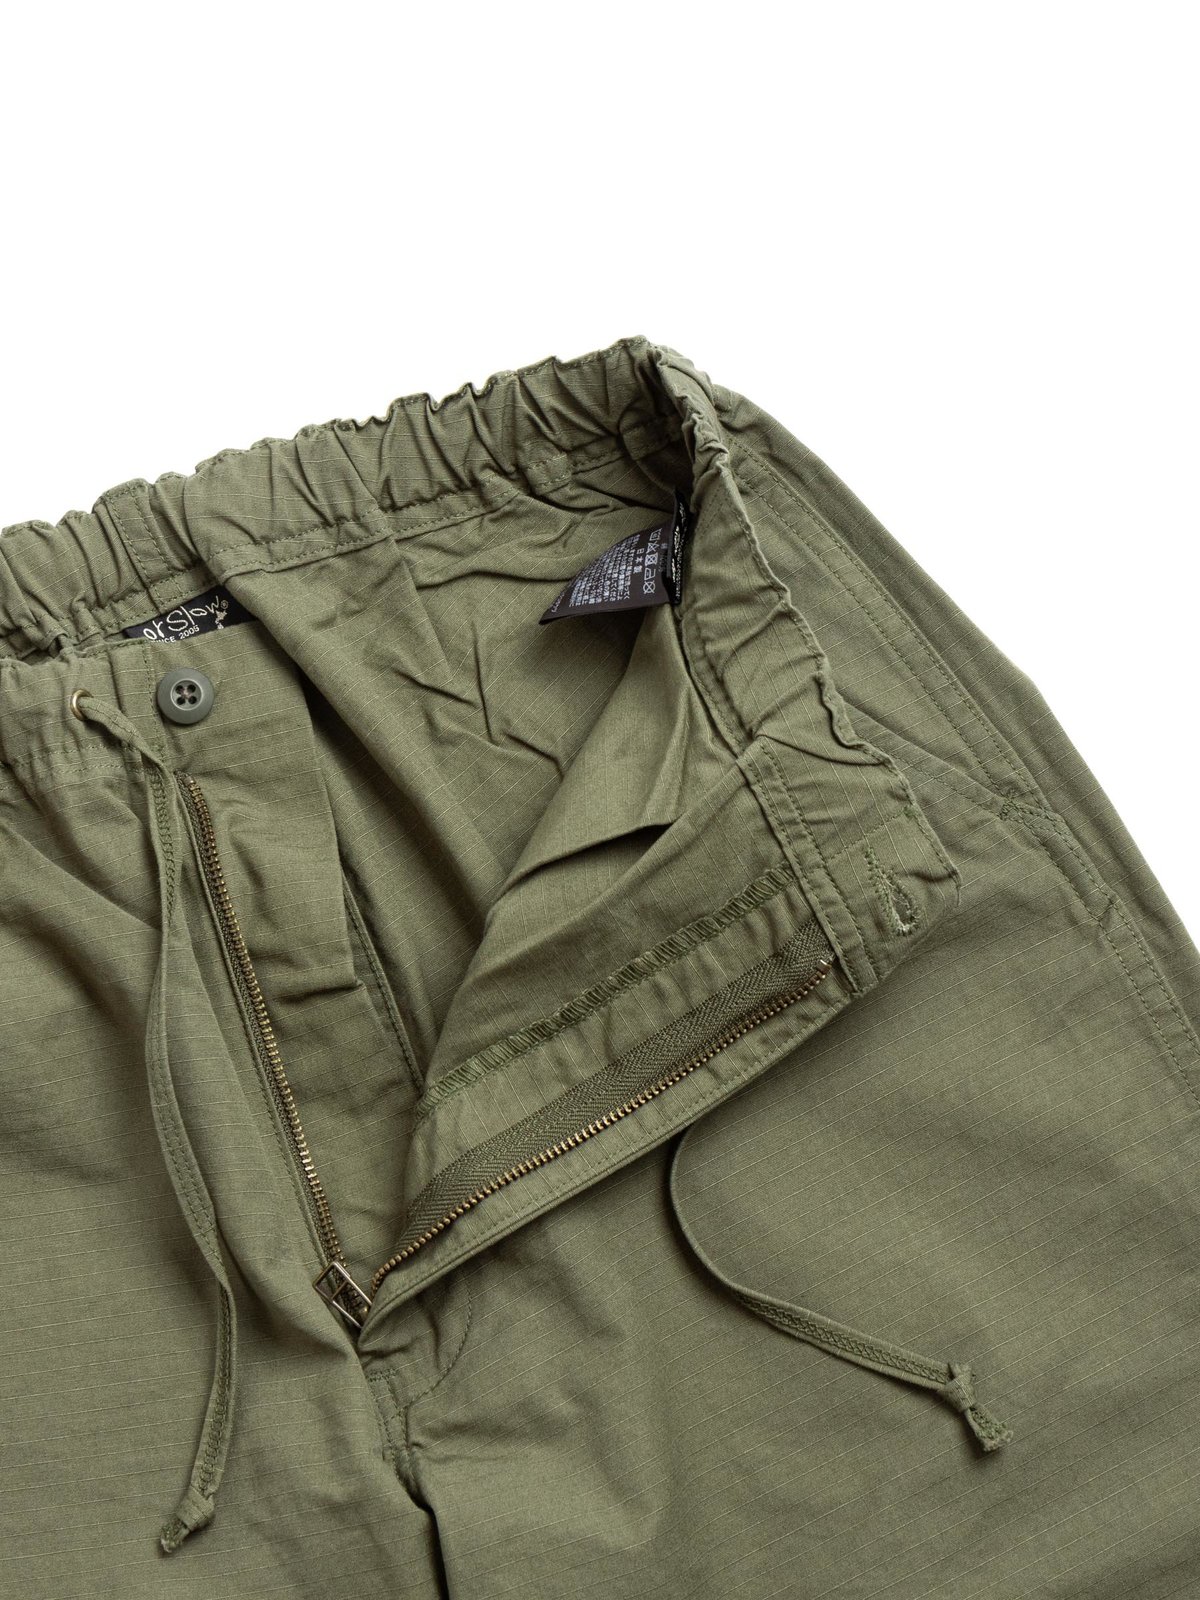 NEW YORKER PANT ARMY RIPSTOP - Image 3